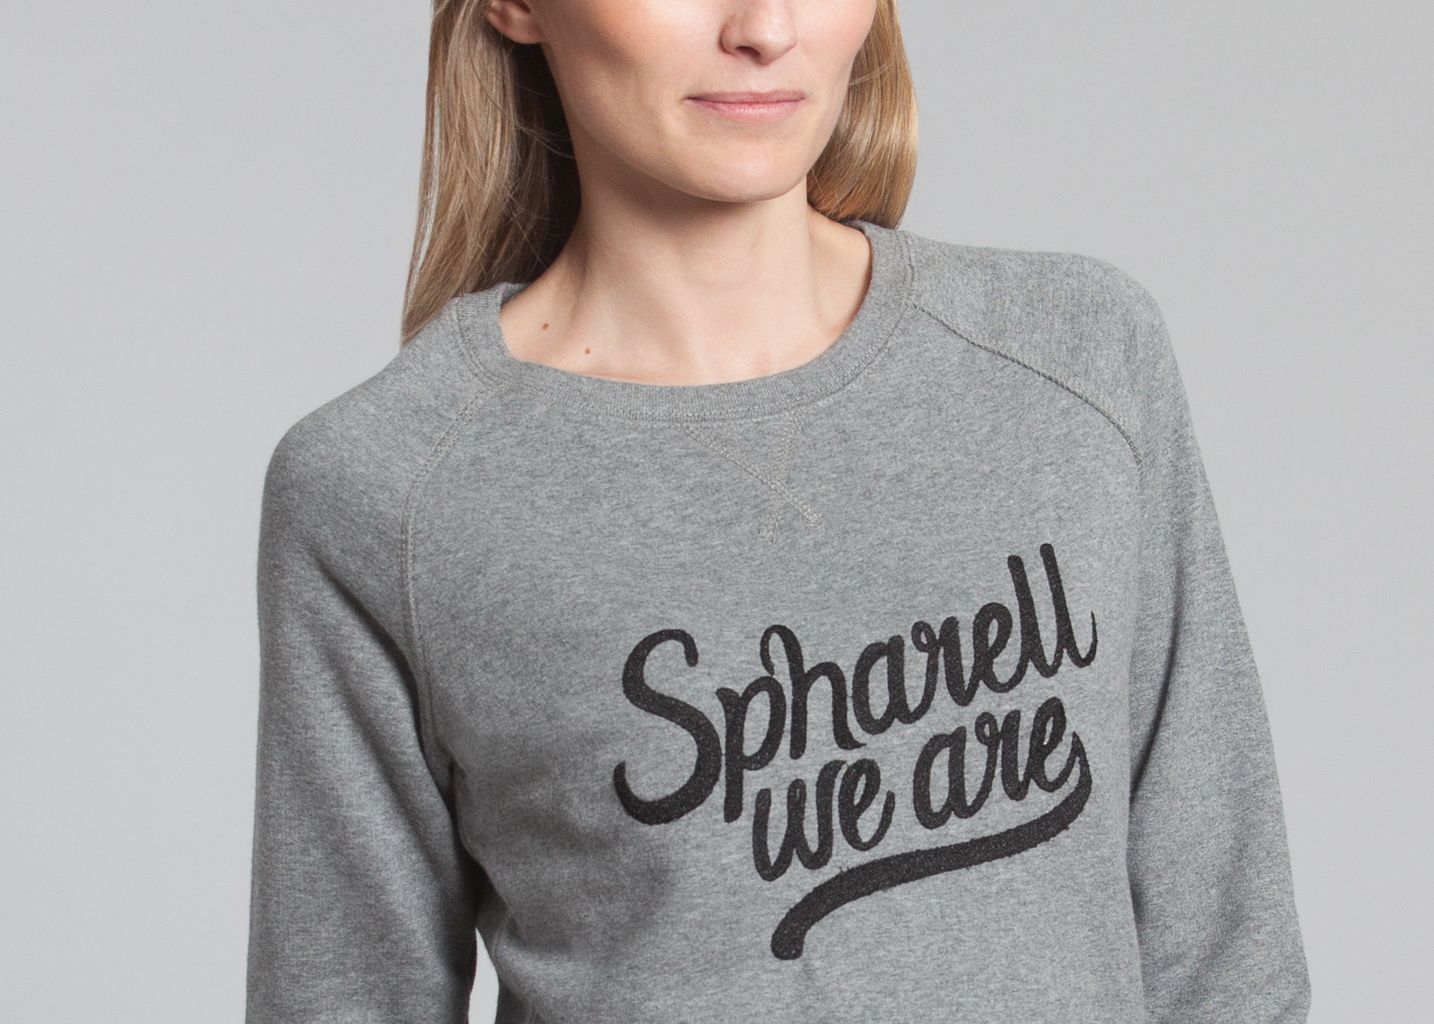 Spharell We Are Sweat - Spharell We Are